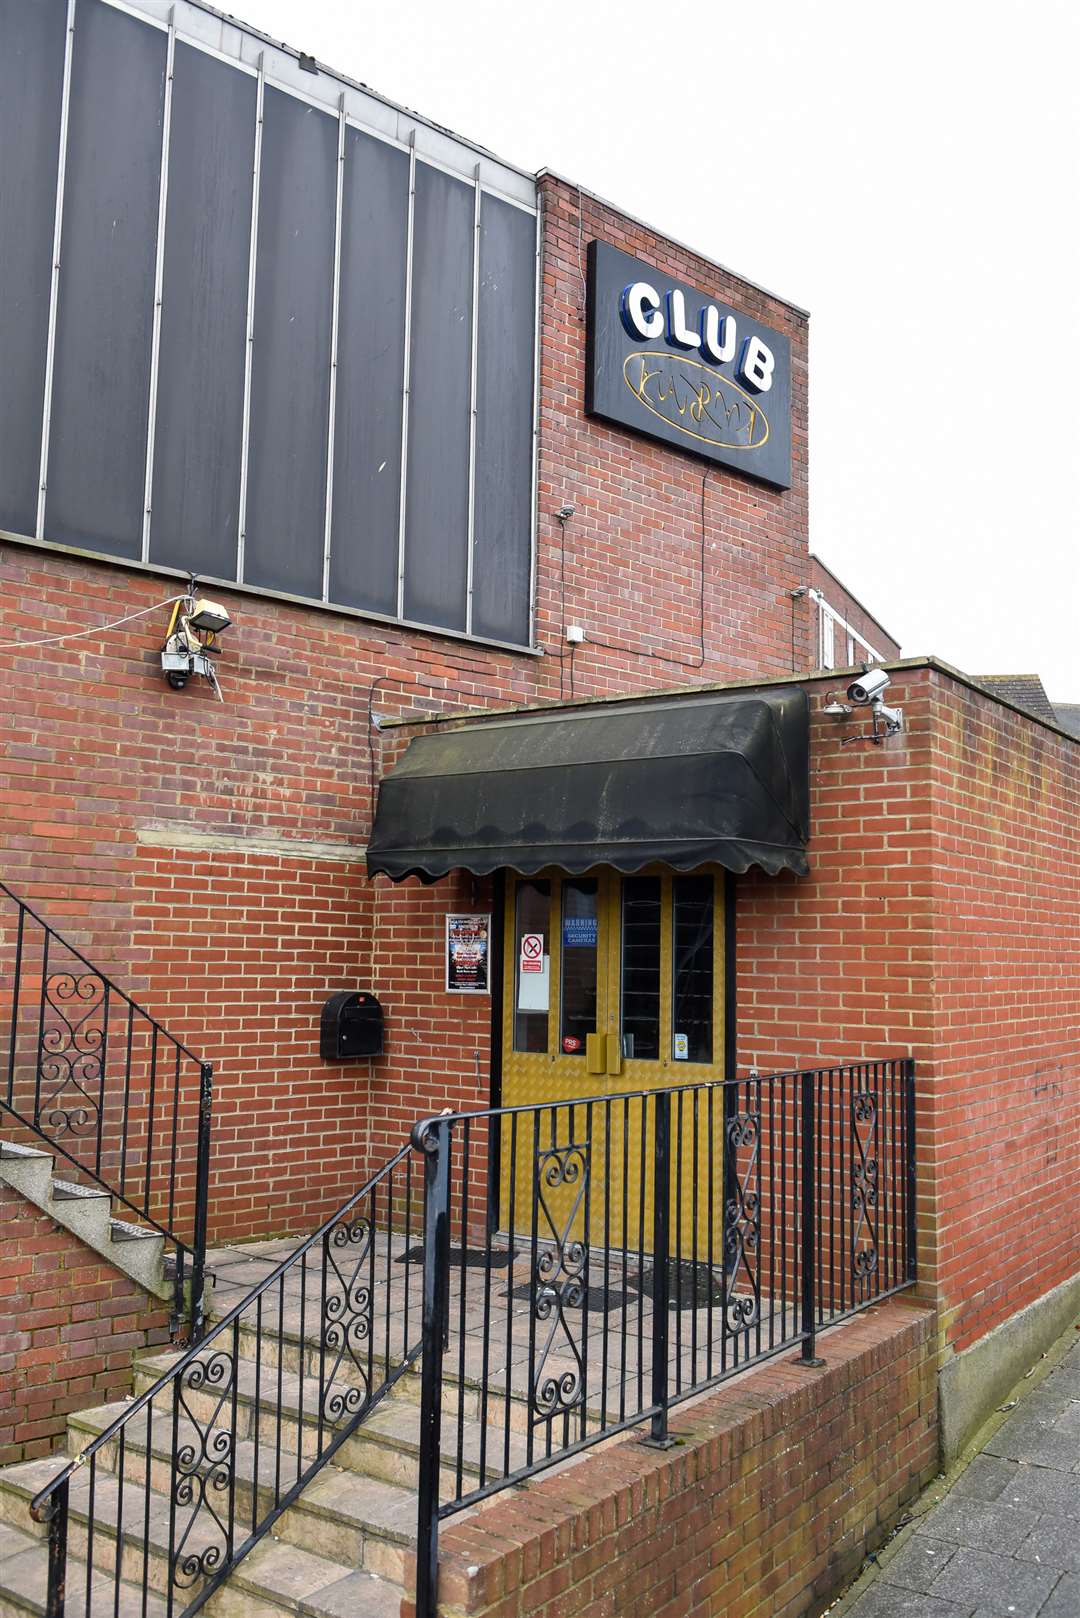 The stabbing took place outside Deja Vu in Dover last year